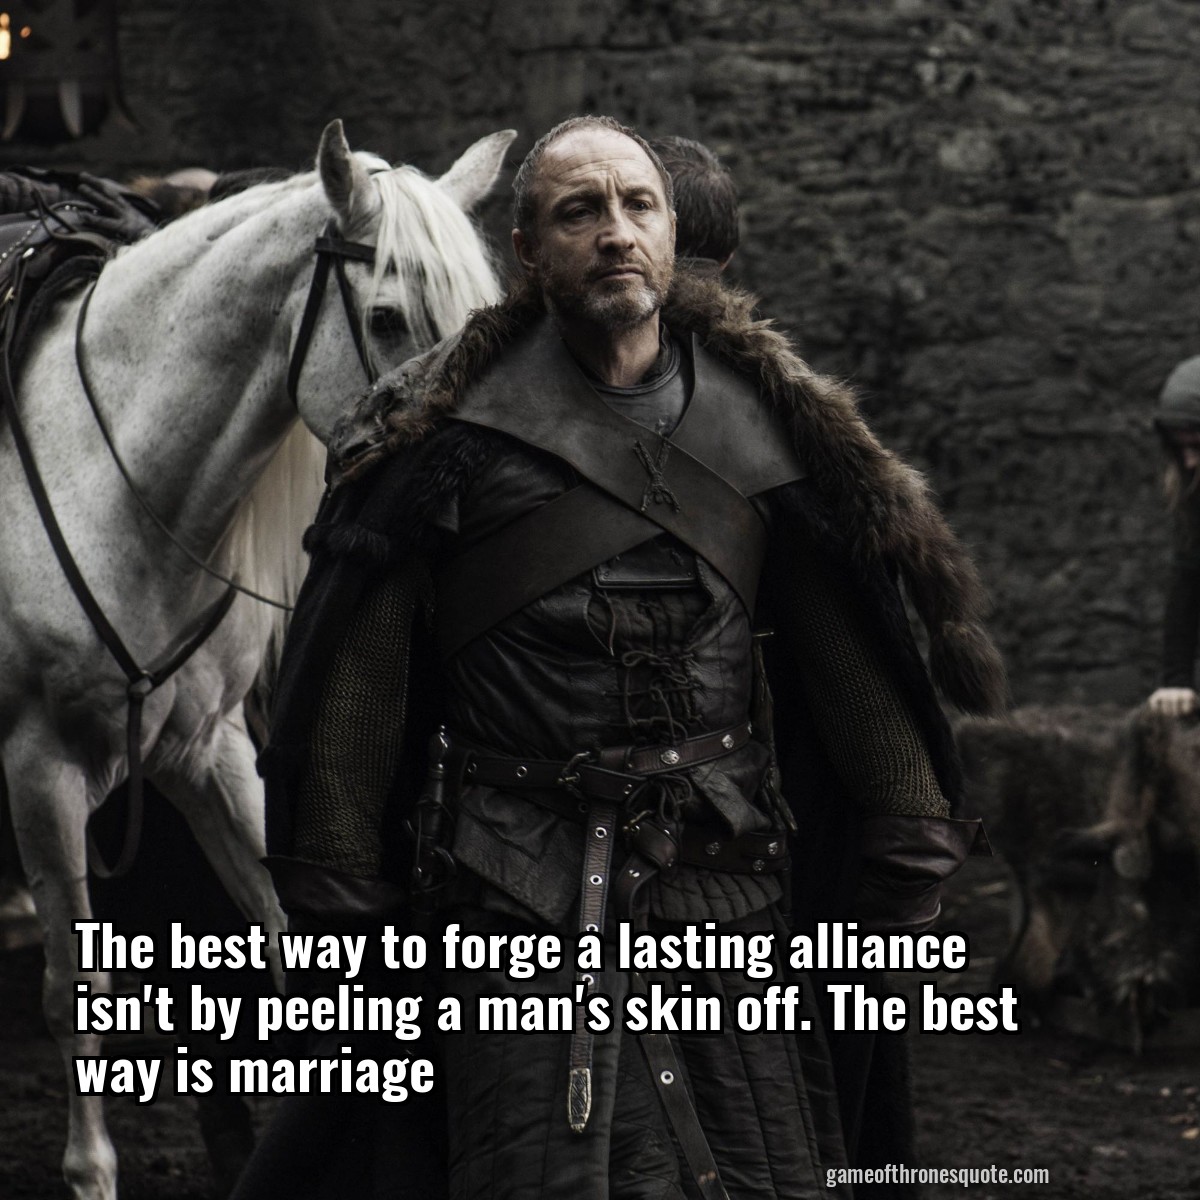 The best way to forge a lasting alliance isn't by peeling a man's skin off. The best way is marriage